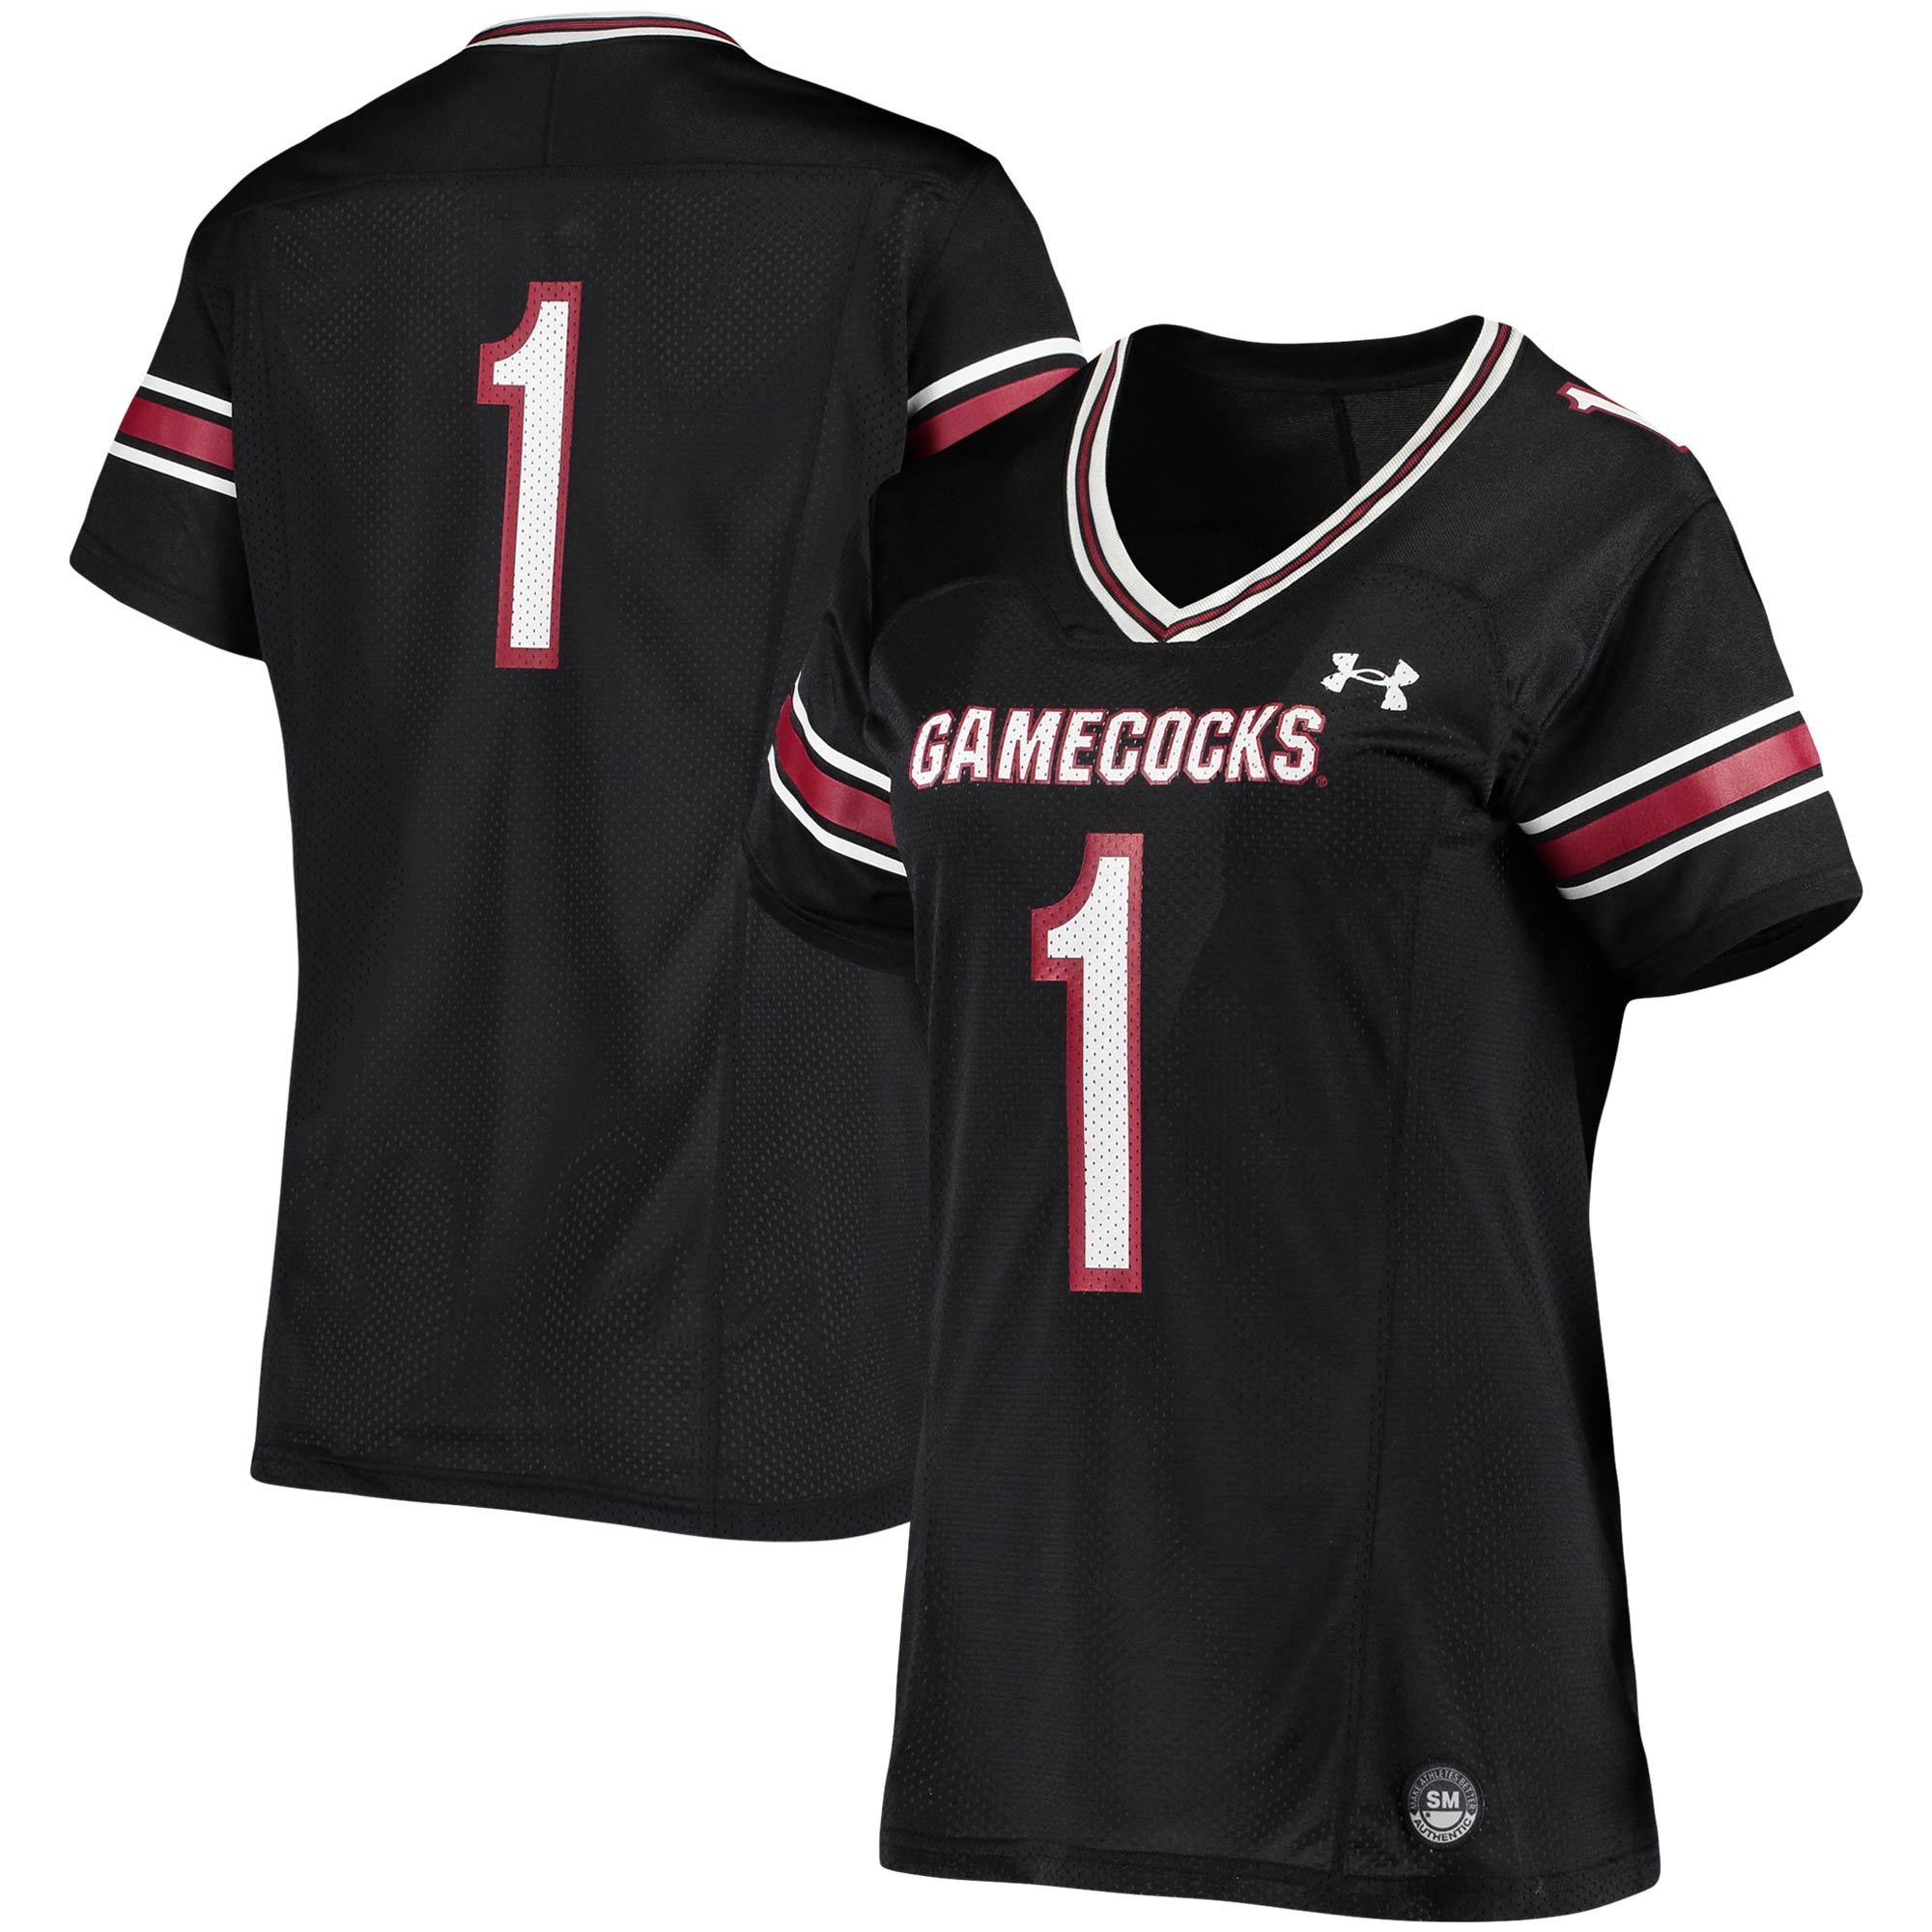 #1 South Carolina Gamecocks Under Armour Women'S Finished Replica  Football Shirts Jersey - Black For Youth Women Men